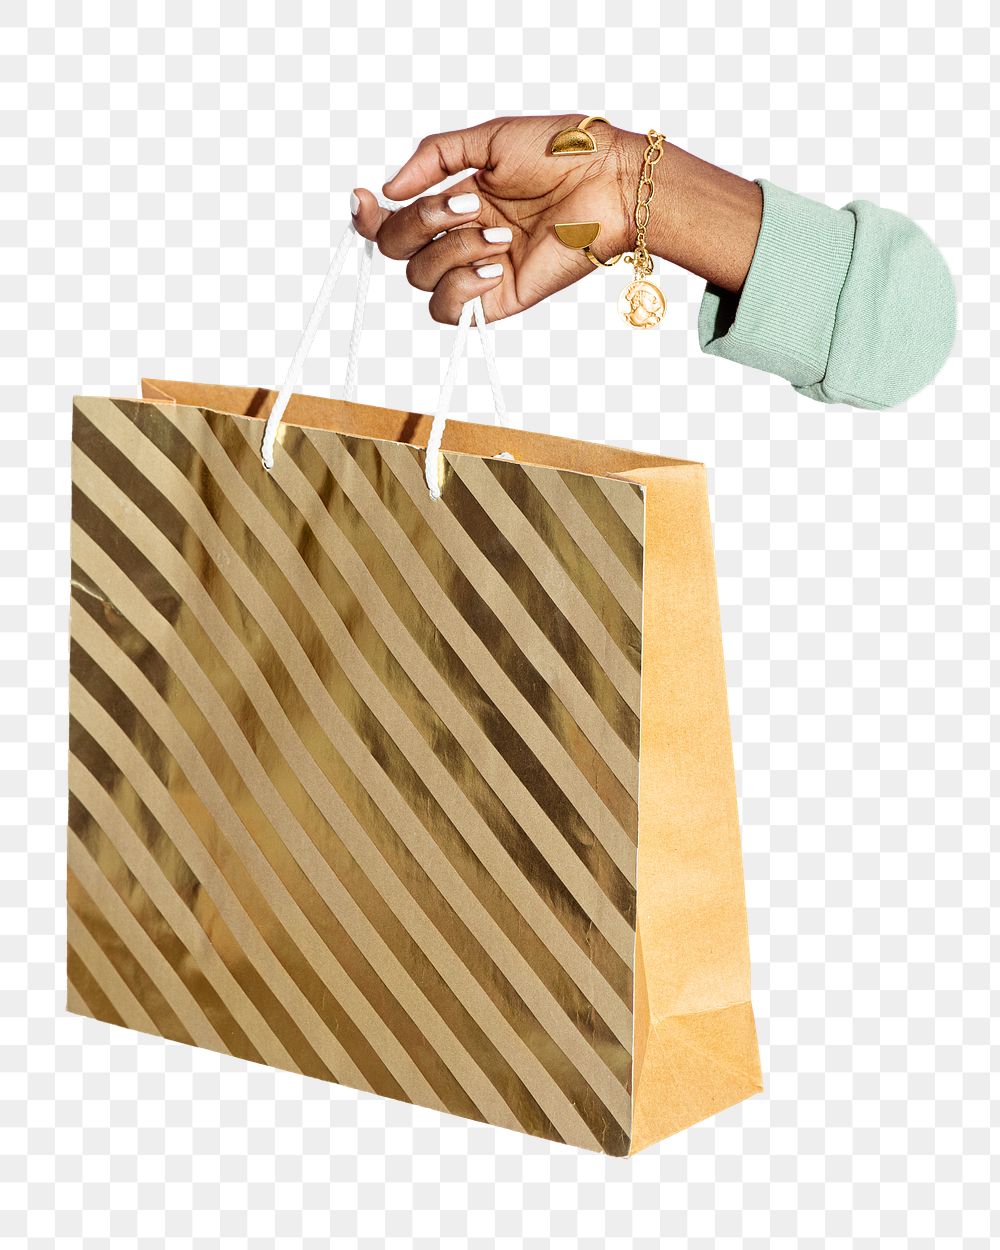 Shopping sale png season, woman holding a bag in transparent background